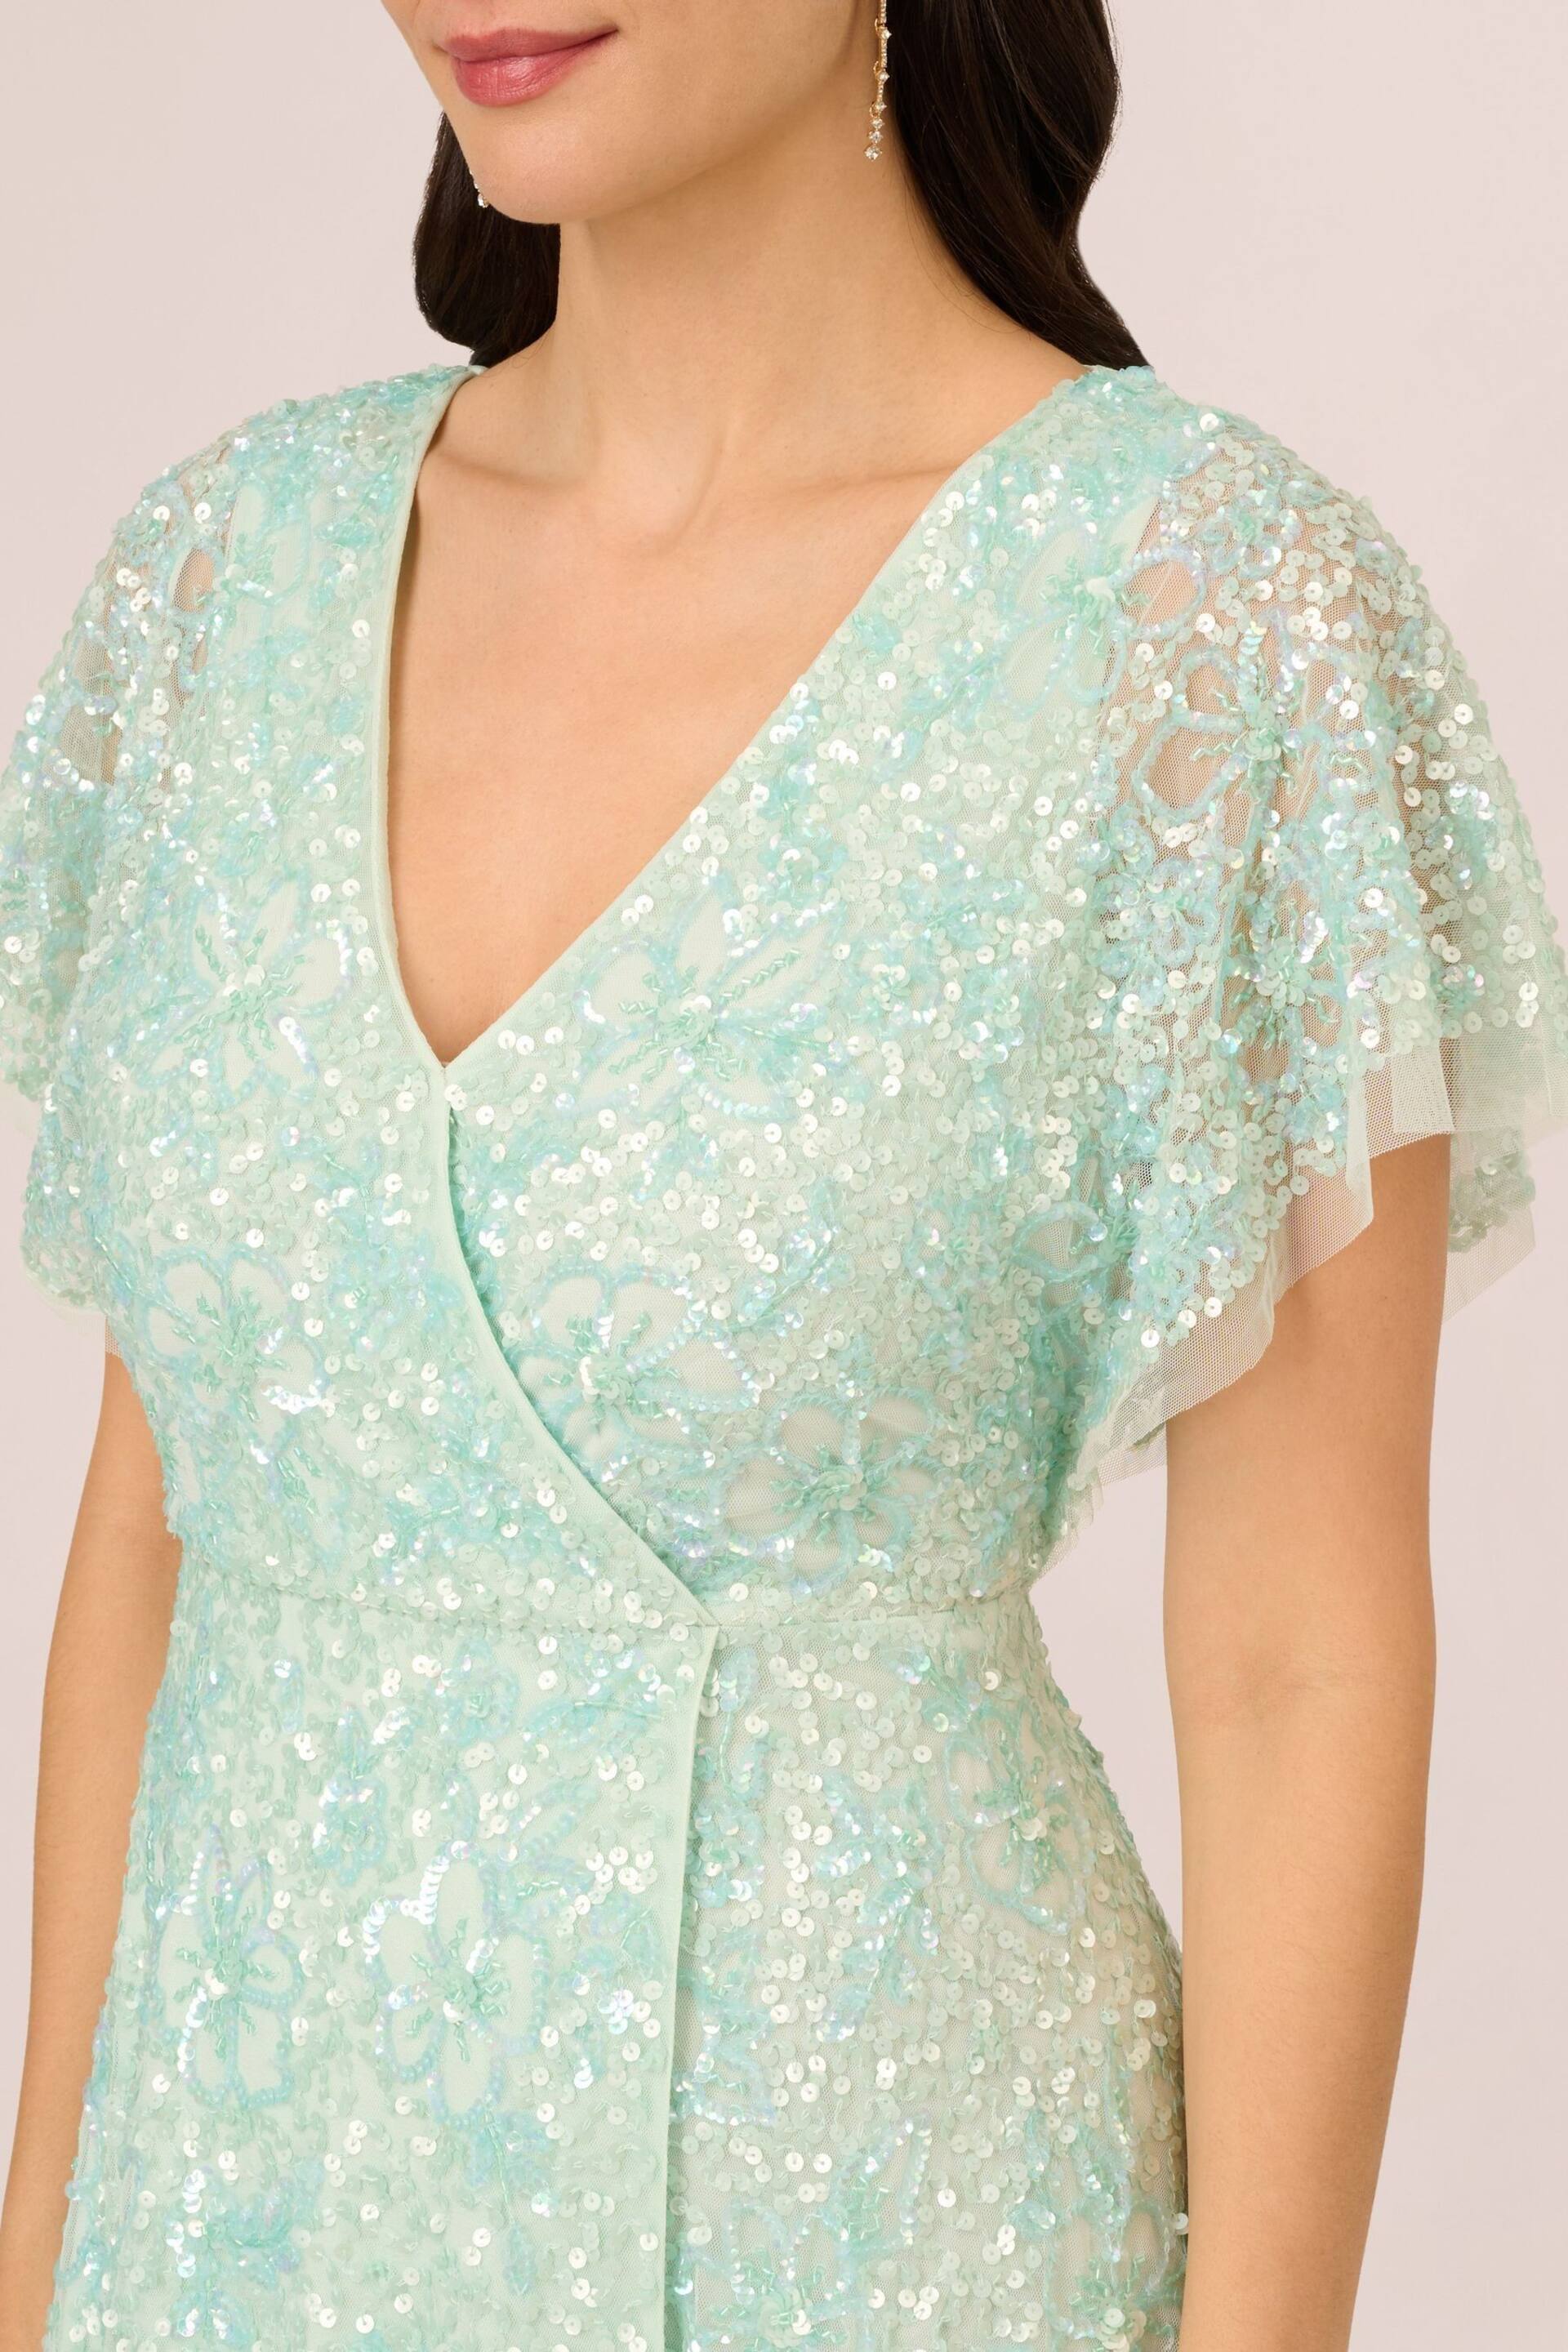 Adrianna Papell Green Beaded Mesh Wrap Dress - Image 4 of 7